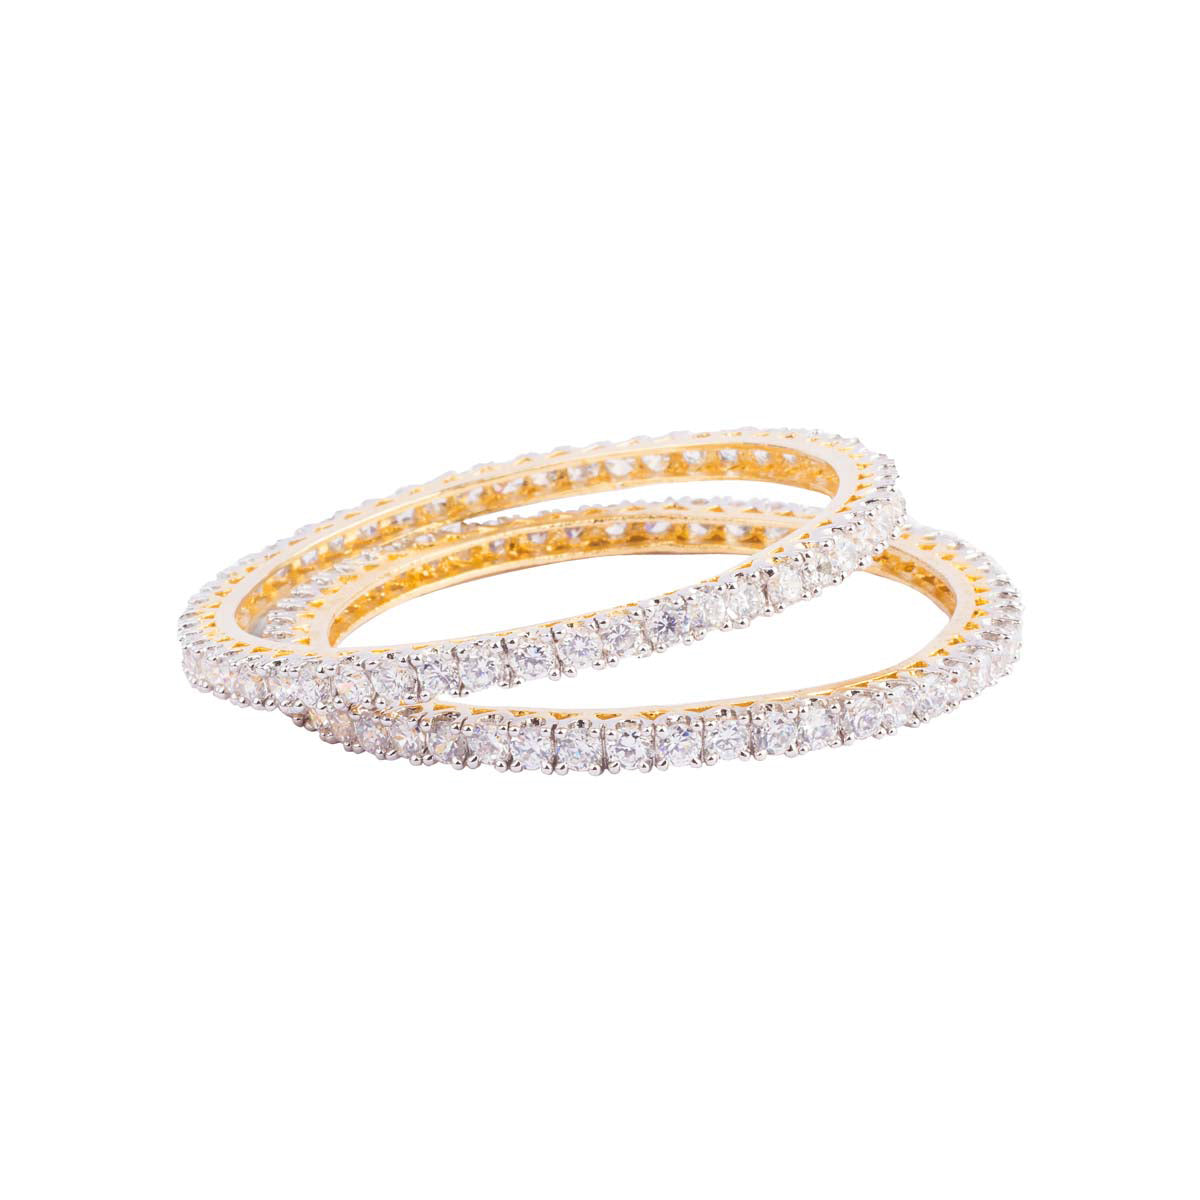 Simple, subtle, yet striking and oh-so-stylish, our single-lined solitaire bangles are studded with dreams.